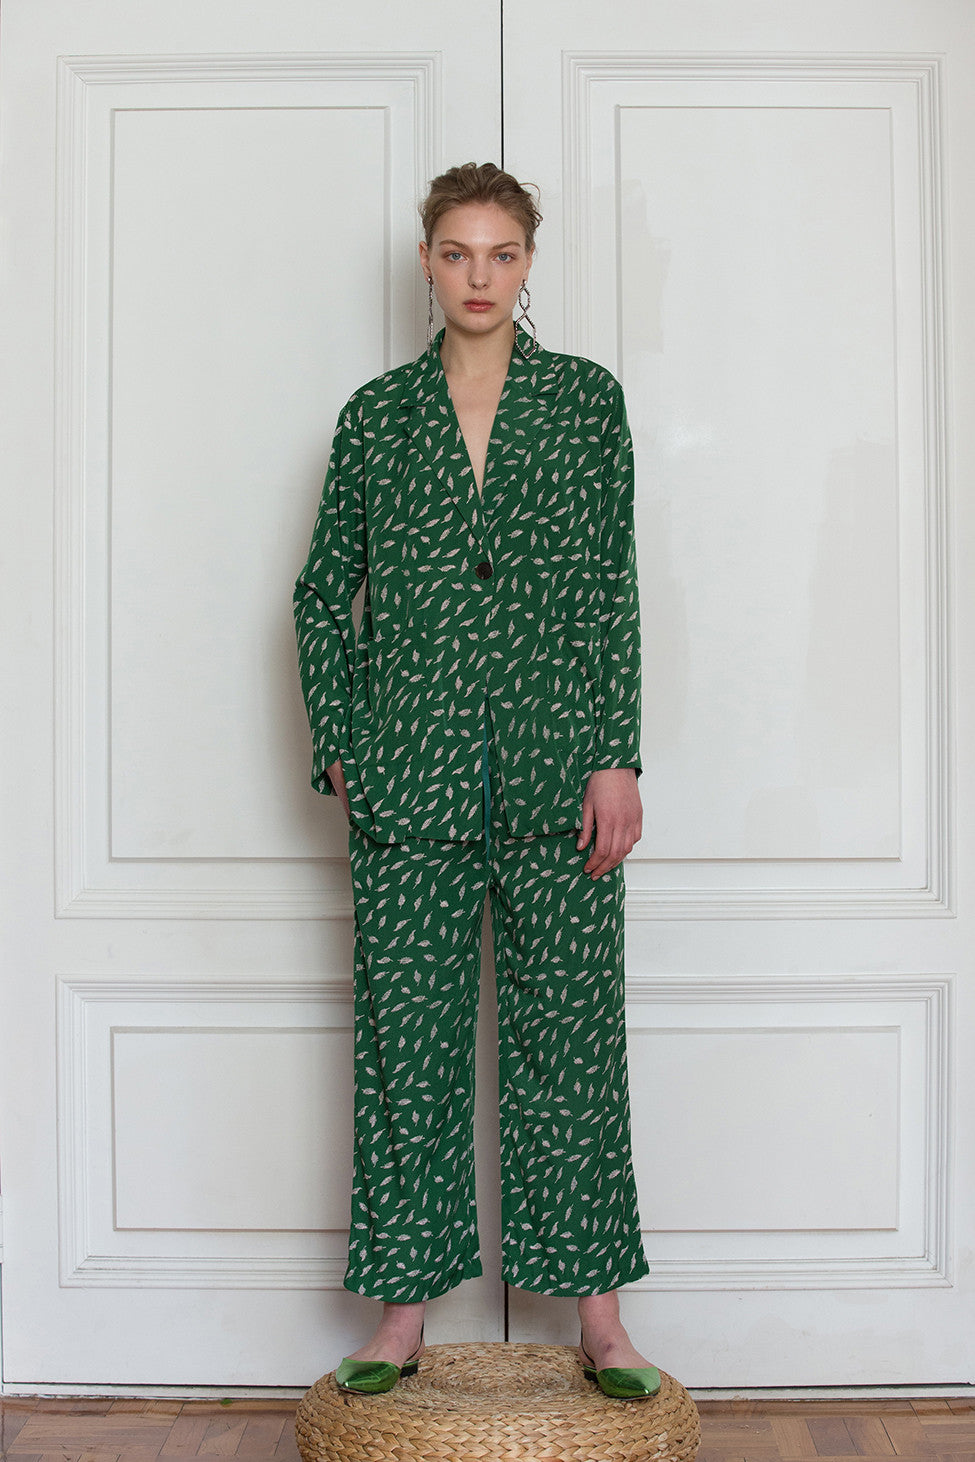 The Colette pajama set in Green feather-pattern. Top features notch collar with sharp lapel, long sleeves, one button placket, left chest pocket and straight hem. Pants feature a gathered elastic waistband and a straight leg. Relaxed fit.